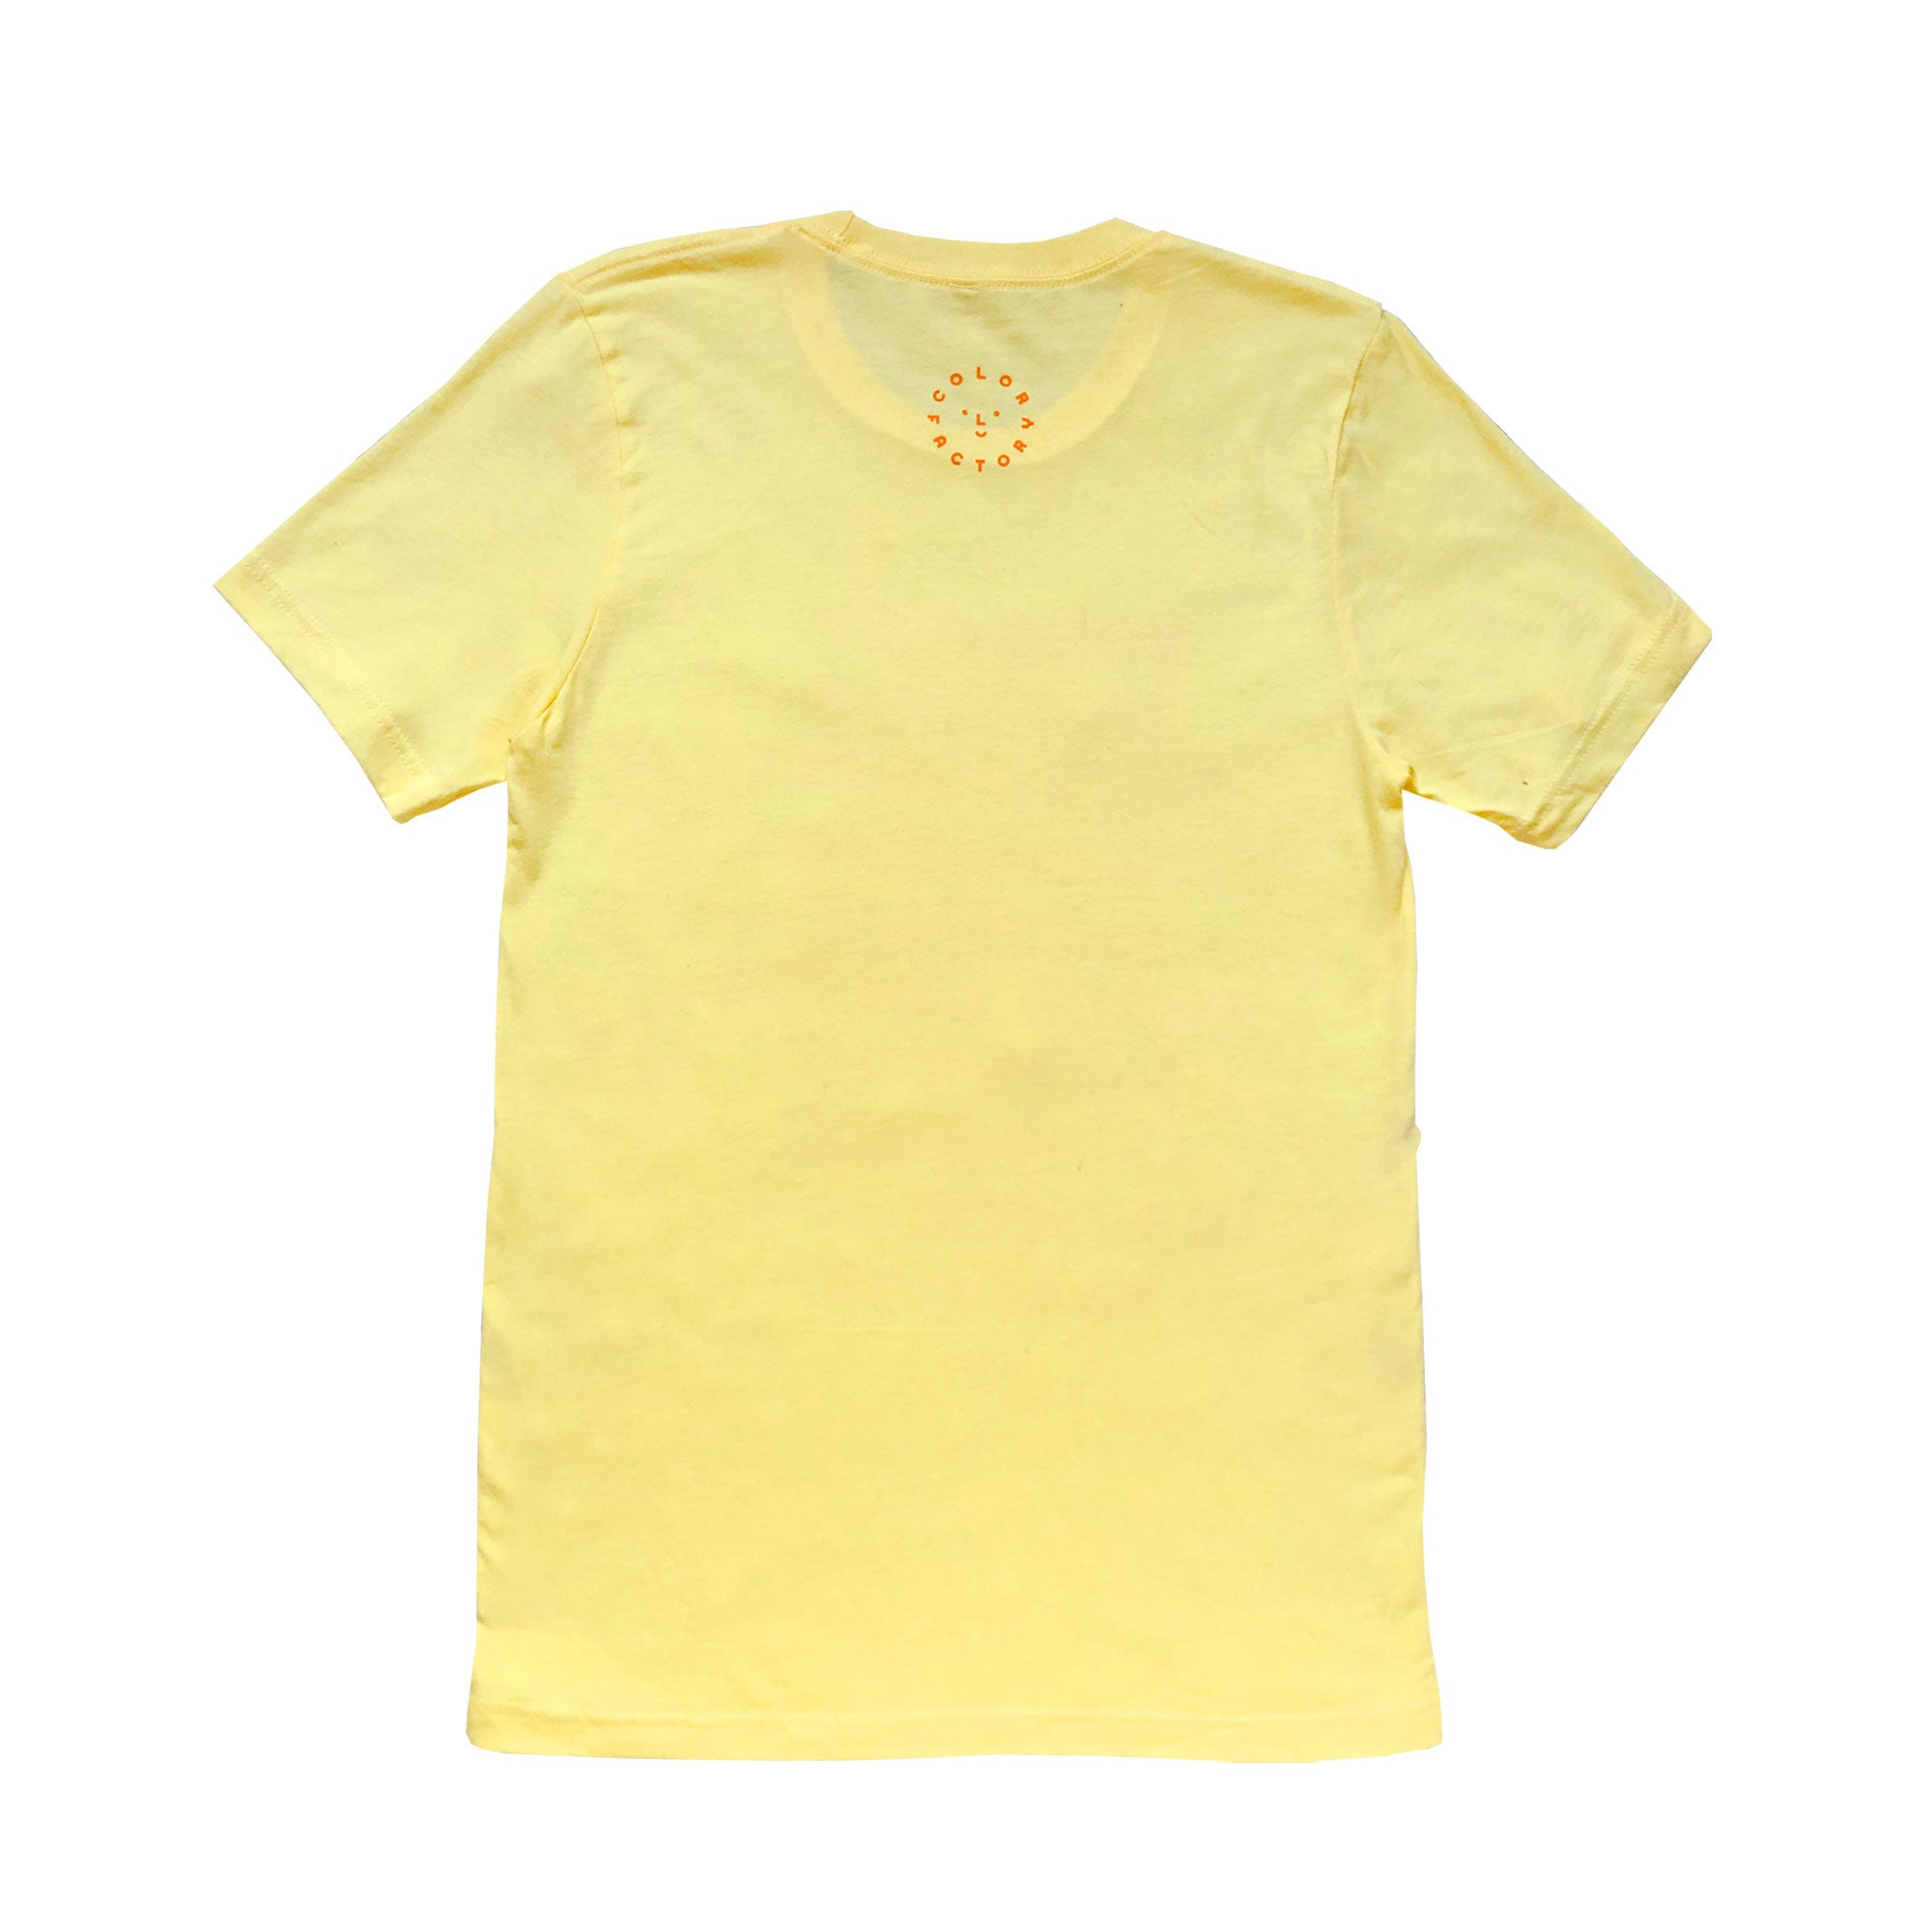 A light yellow t-shirt with a list of "yellow" items printed on the front (in orange ink). List includes happy items (like Sunshine) as well as funny items (like swiss cheese). The back has a simple Color Factory logo at the top. 